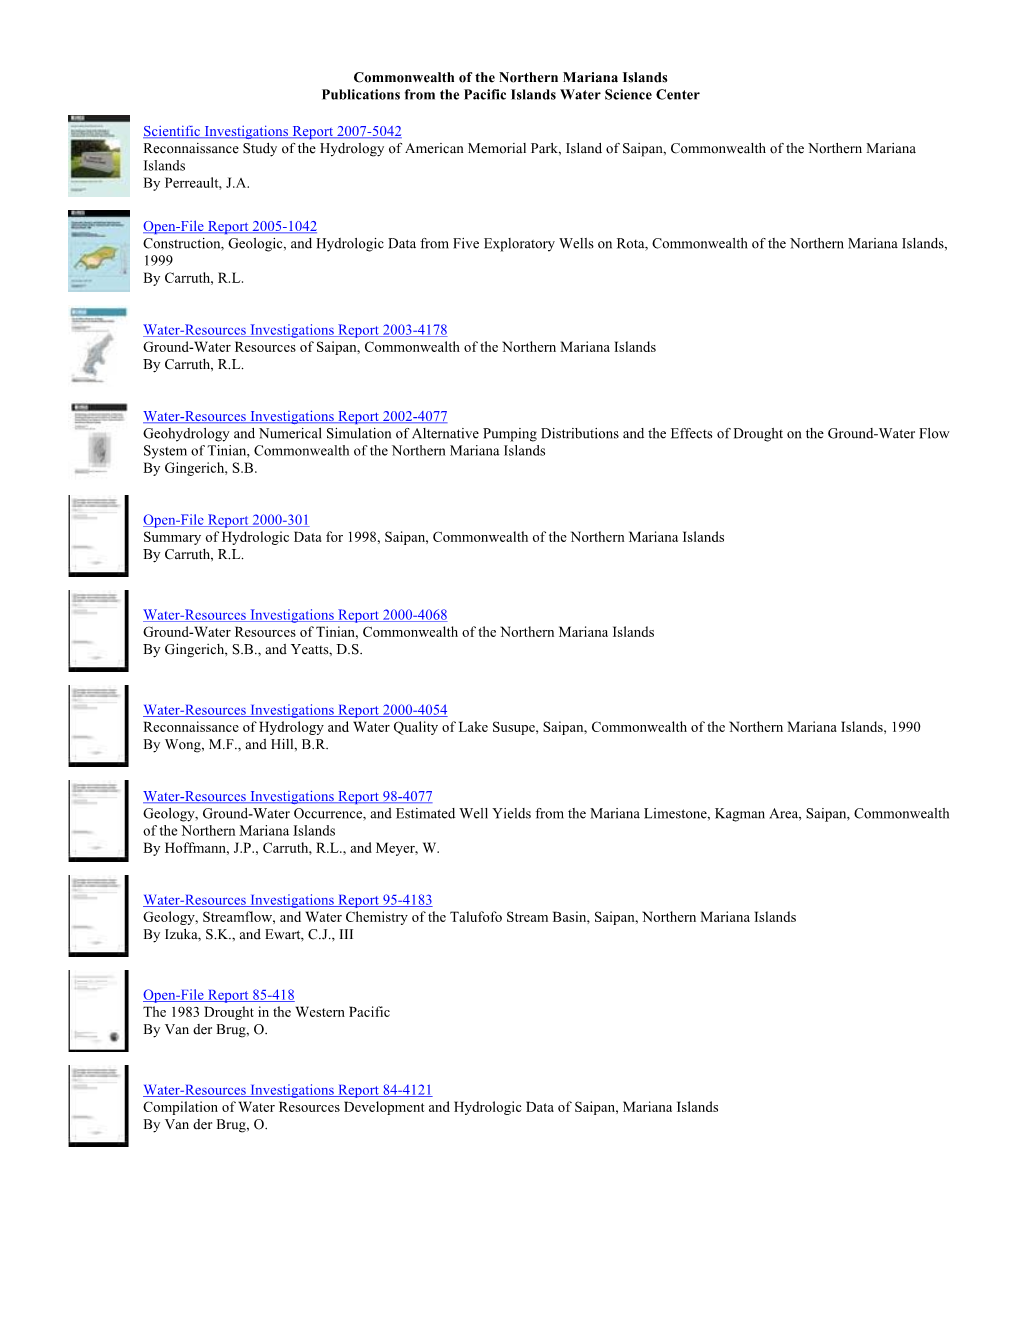 Commonwealth of the Northern Mariana Islands Publications from the Pacific Islands Water Science Center